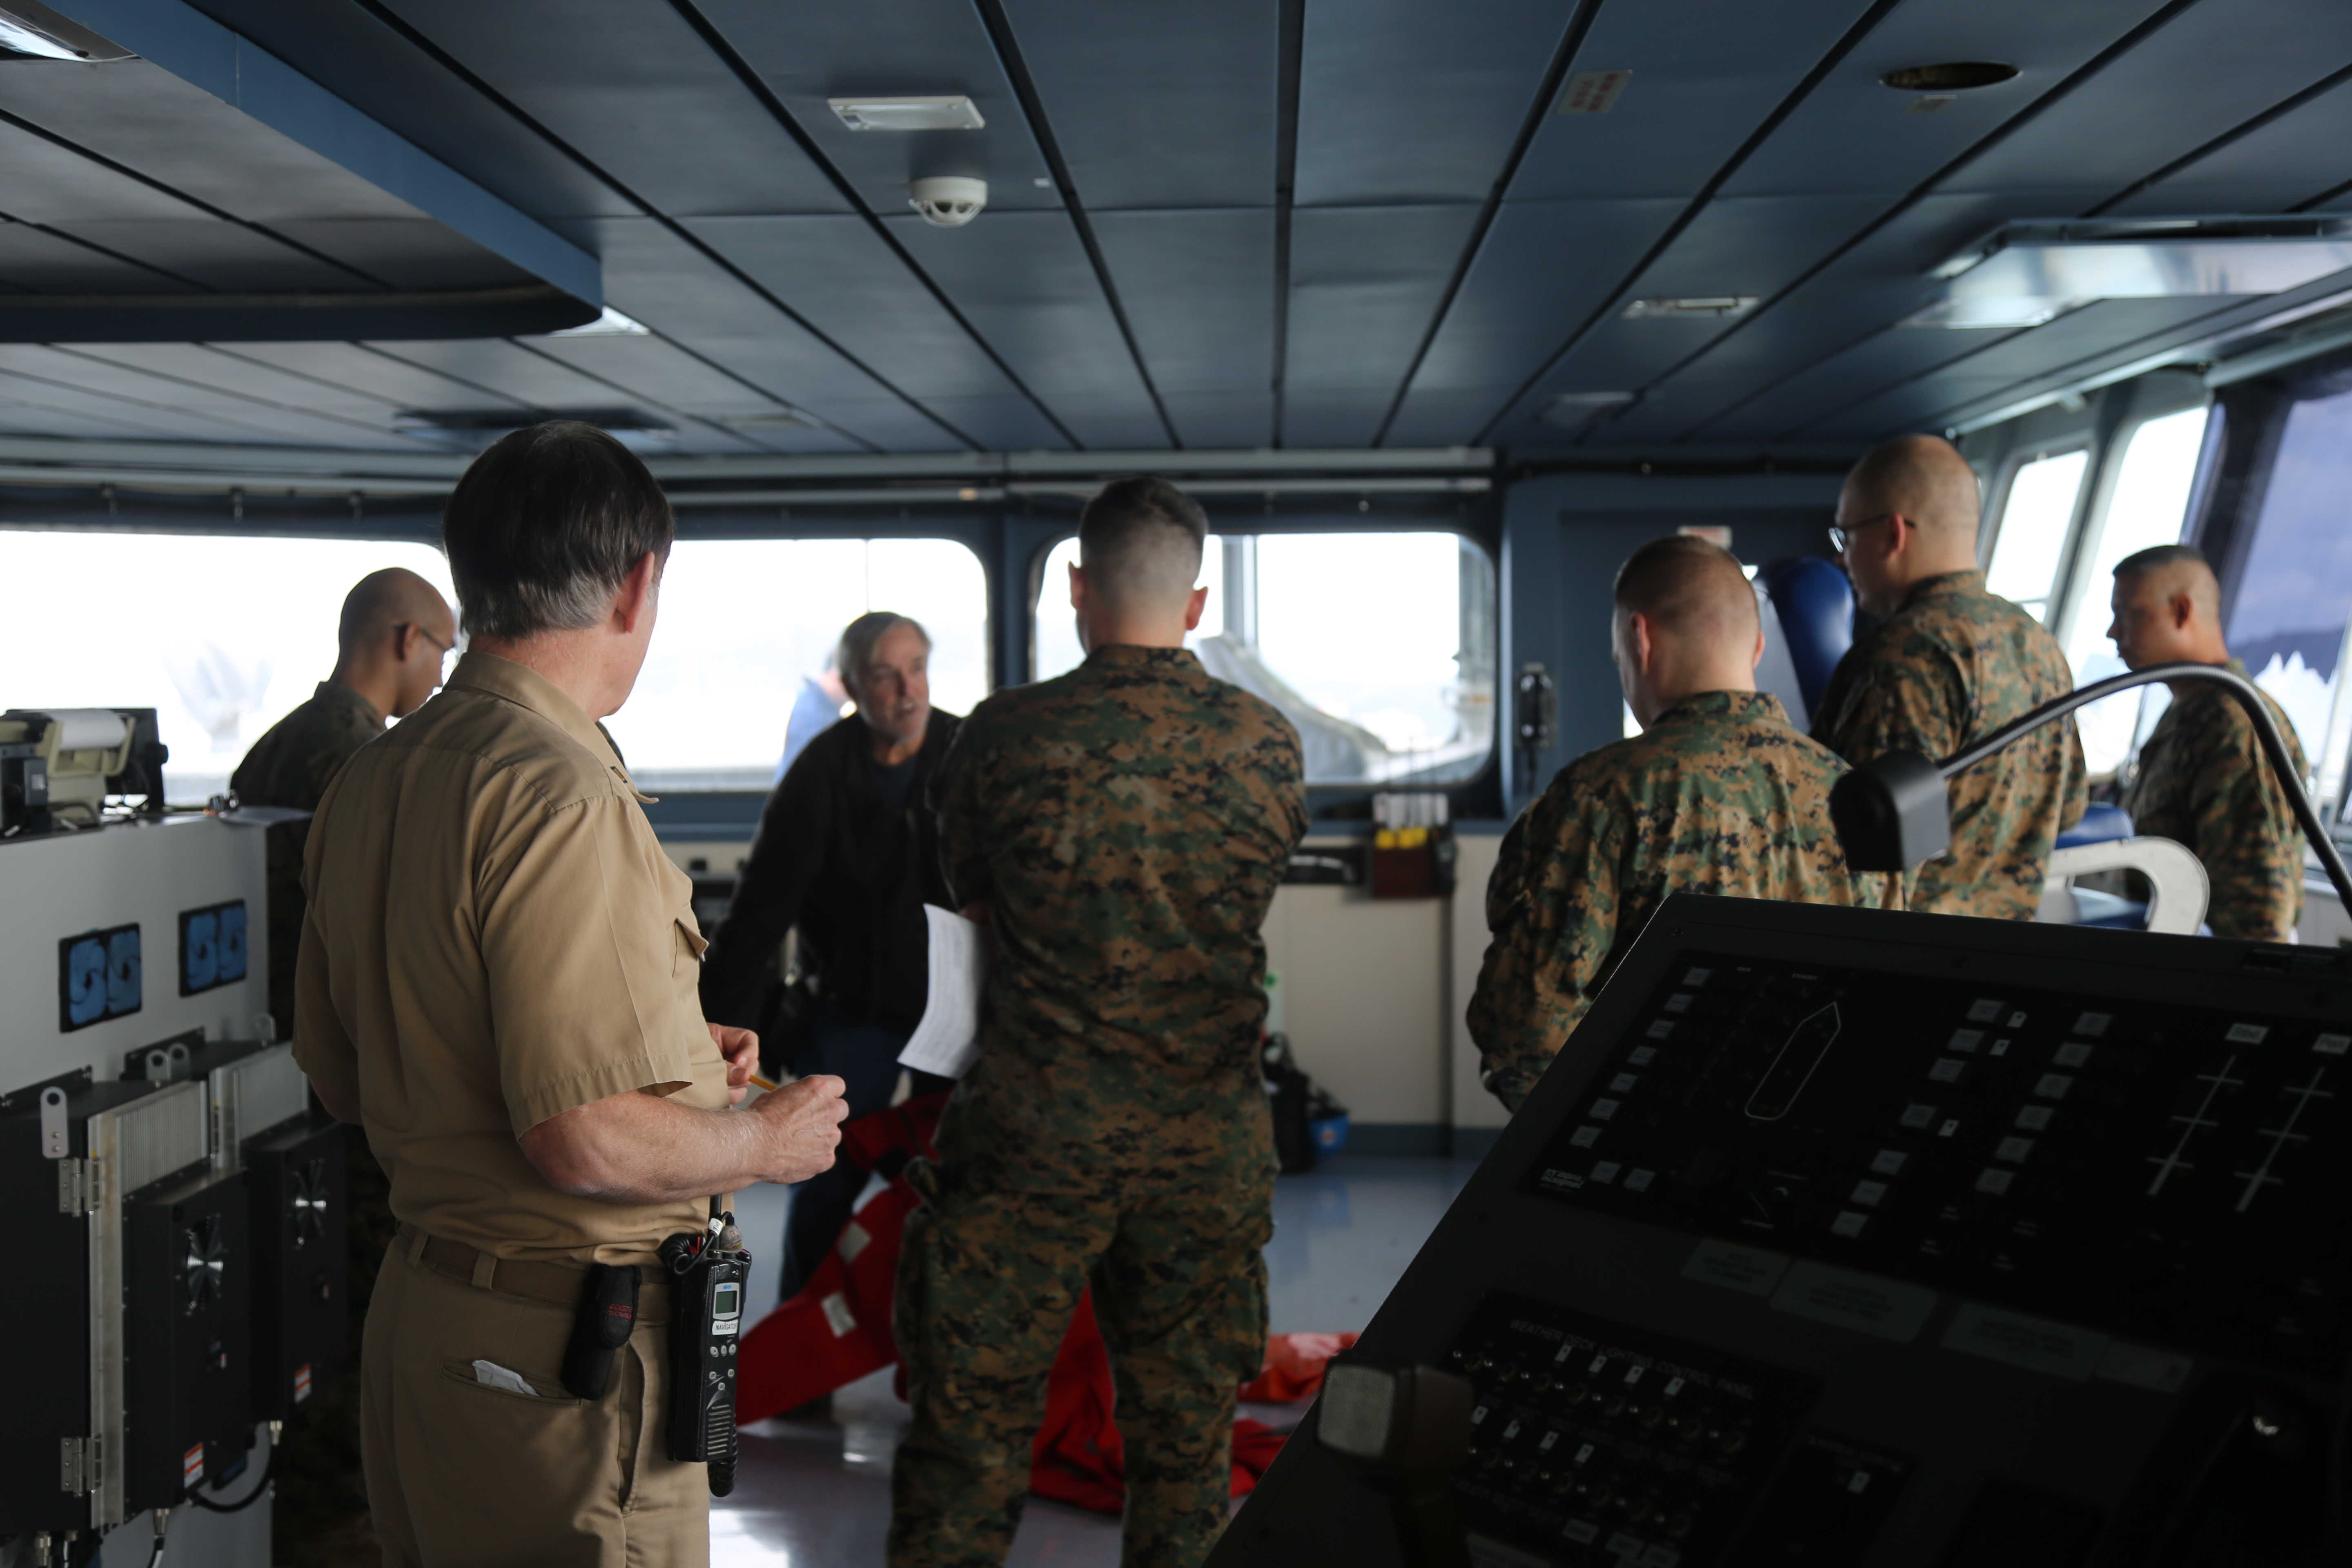 Marines from 3rd Marine Division surveyed the USNS Matthew Perry (T-AKE-9) in order to plan for future operations aboard the ship, maximizing the ship’s potential for Marines to operate at sea as they did in the past. US Marine Corps photo.